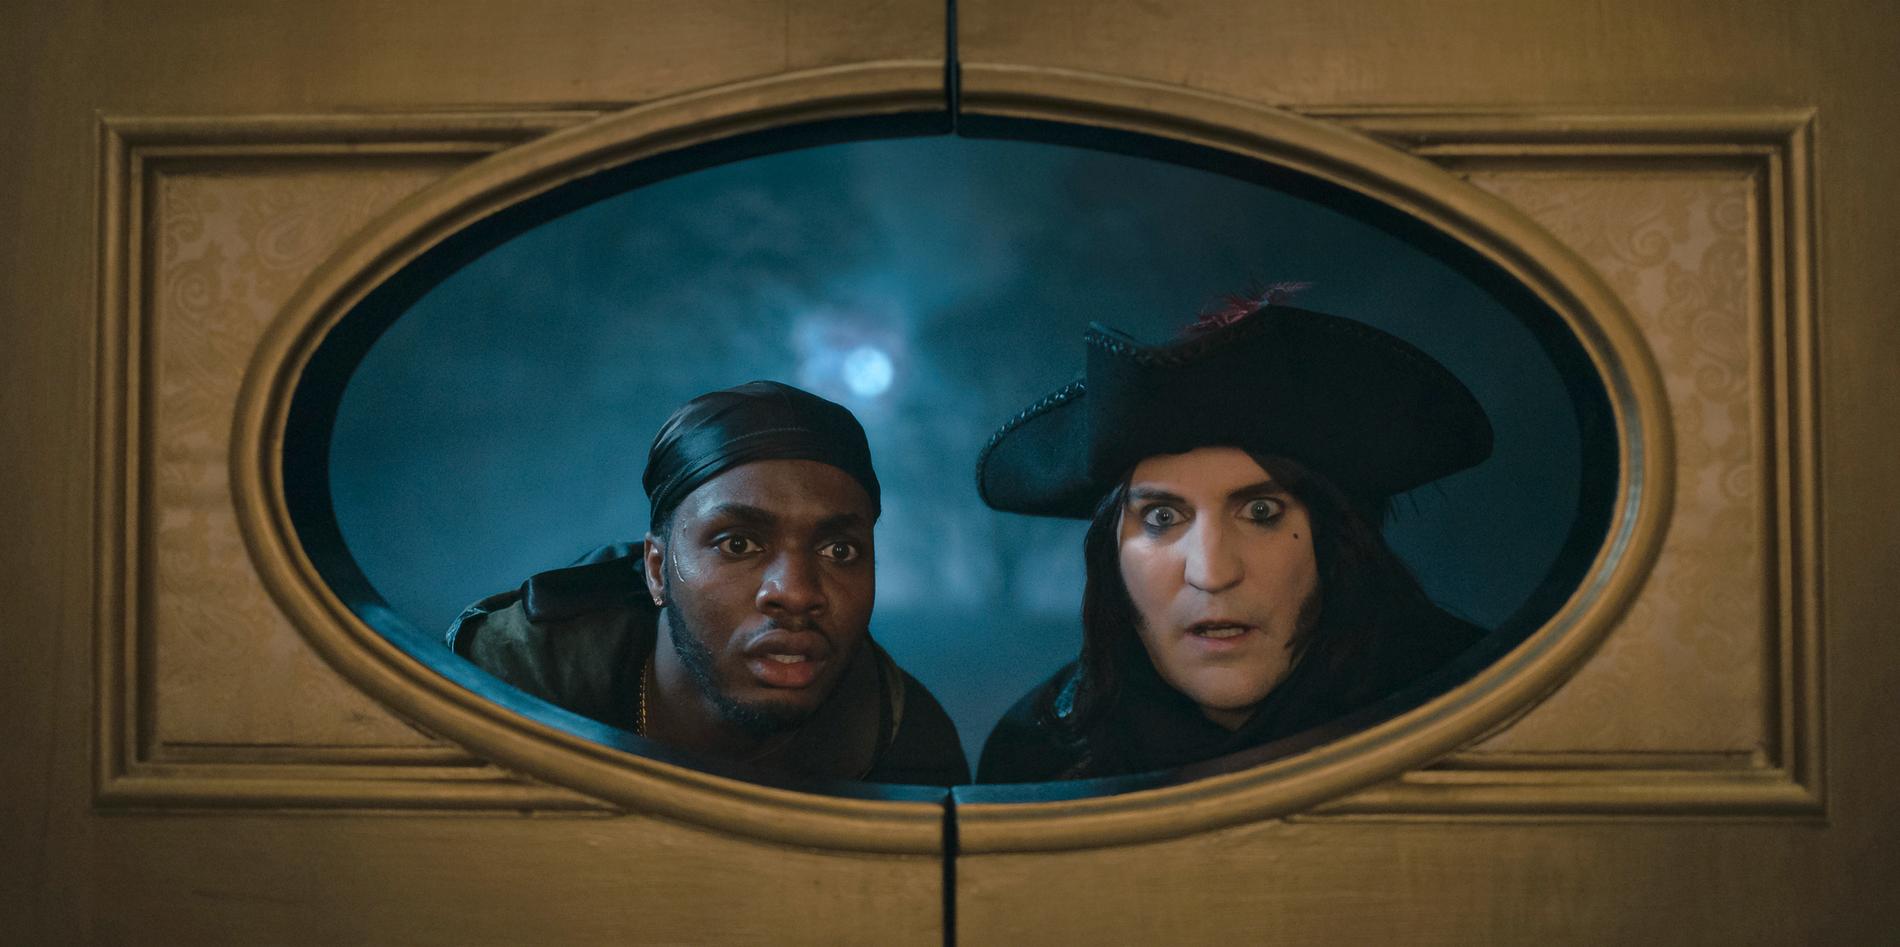 Duayne Boachie och Noel Fielding i ”The completely made-up adventures of Dick Turpin”.